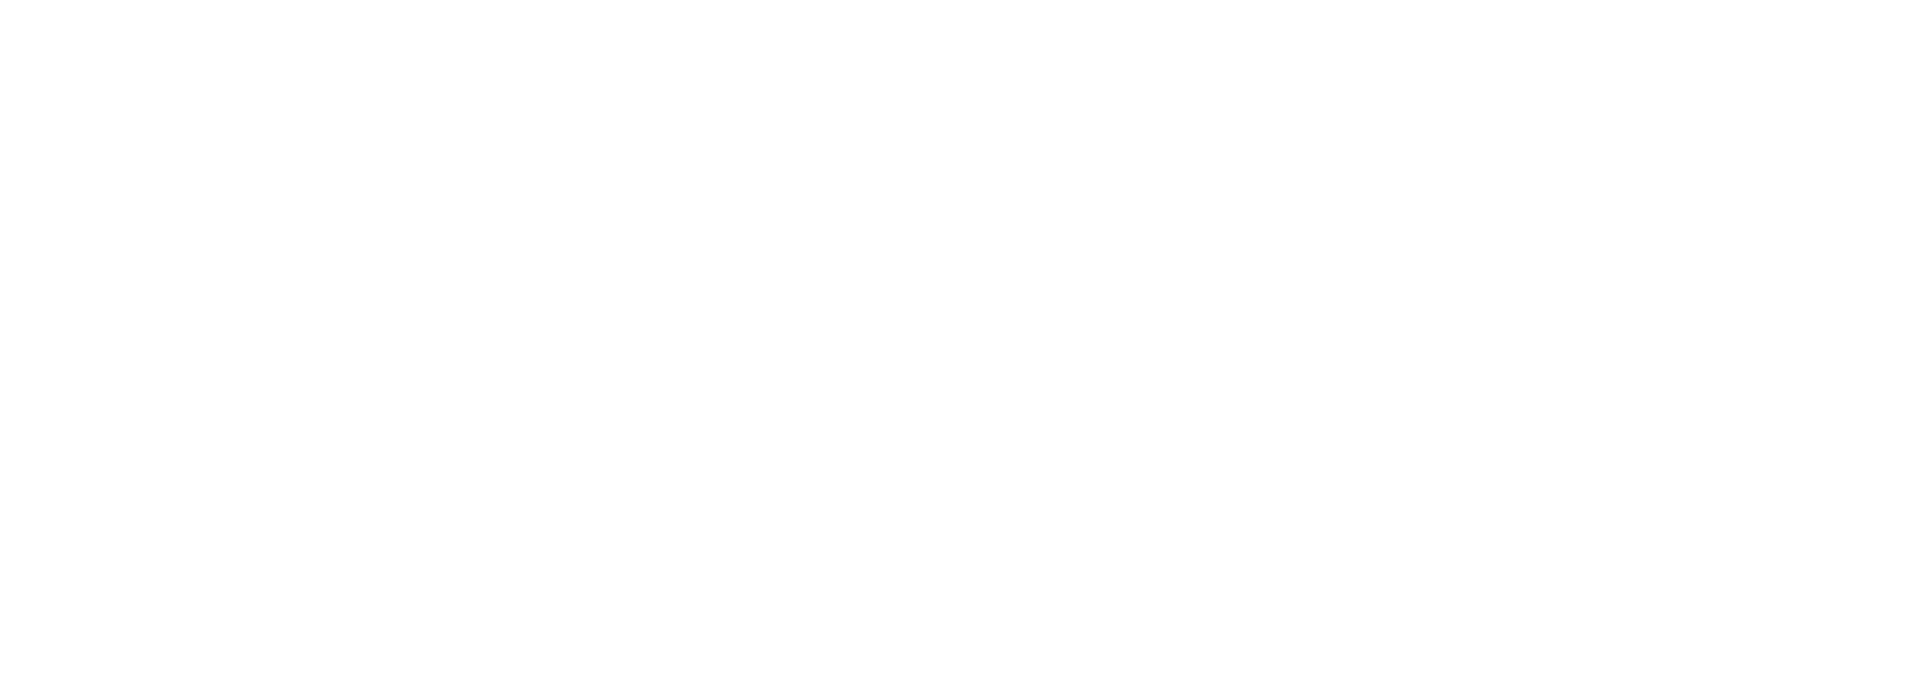 Lucid Logo - LUCID - Life Underwriting, Claims and Insurance Doctors